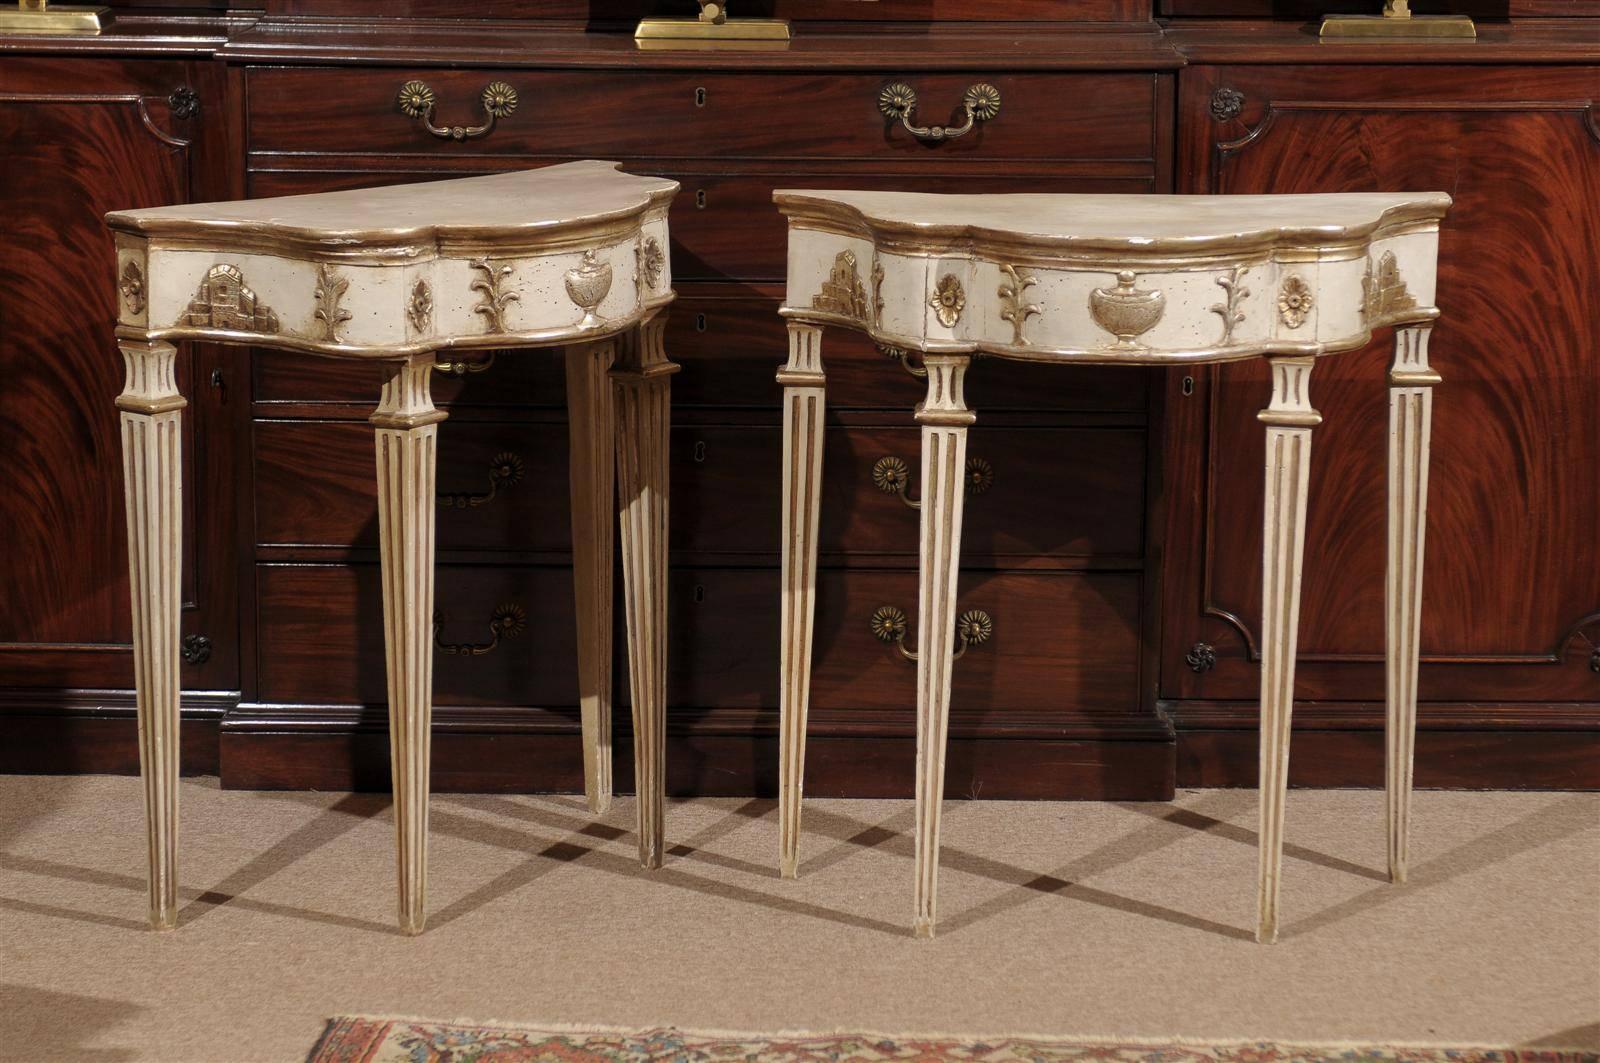 A pair of Italian painted and silvered Neoclassical consoles with urn detail and fluted legs. 

